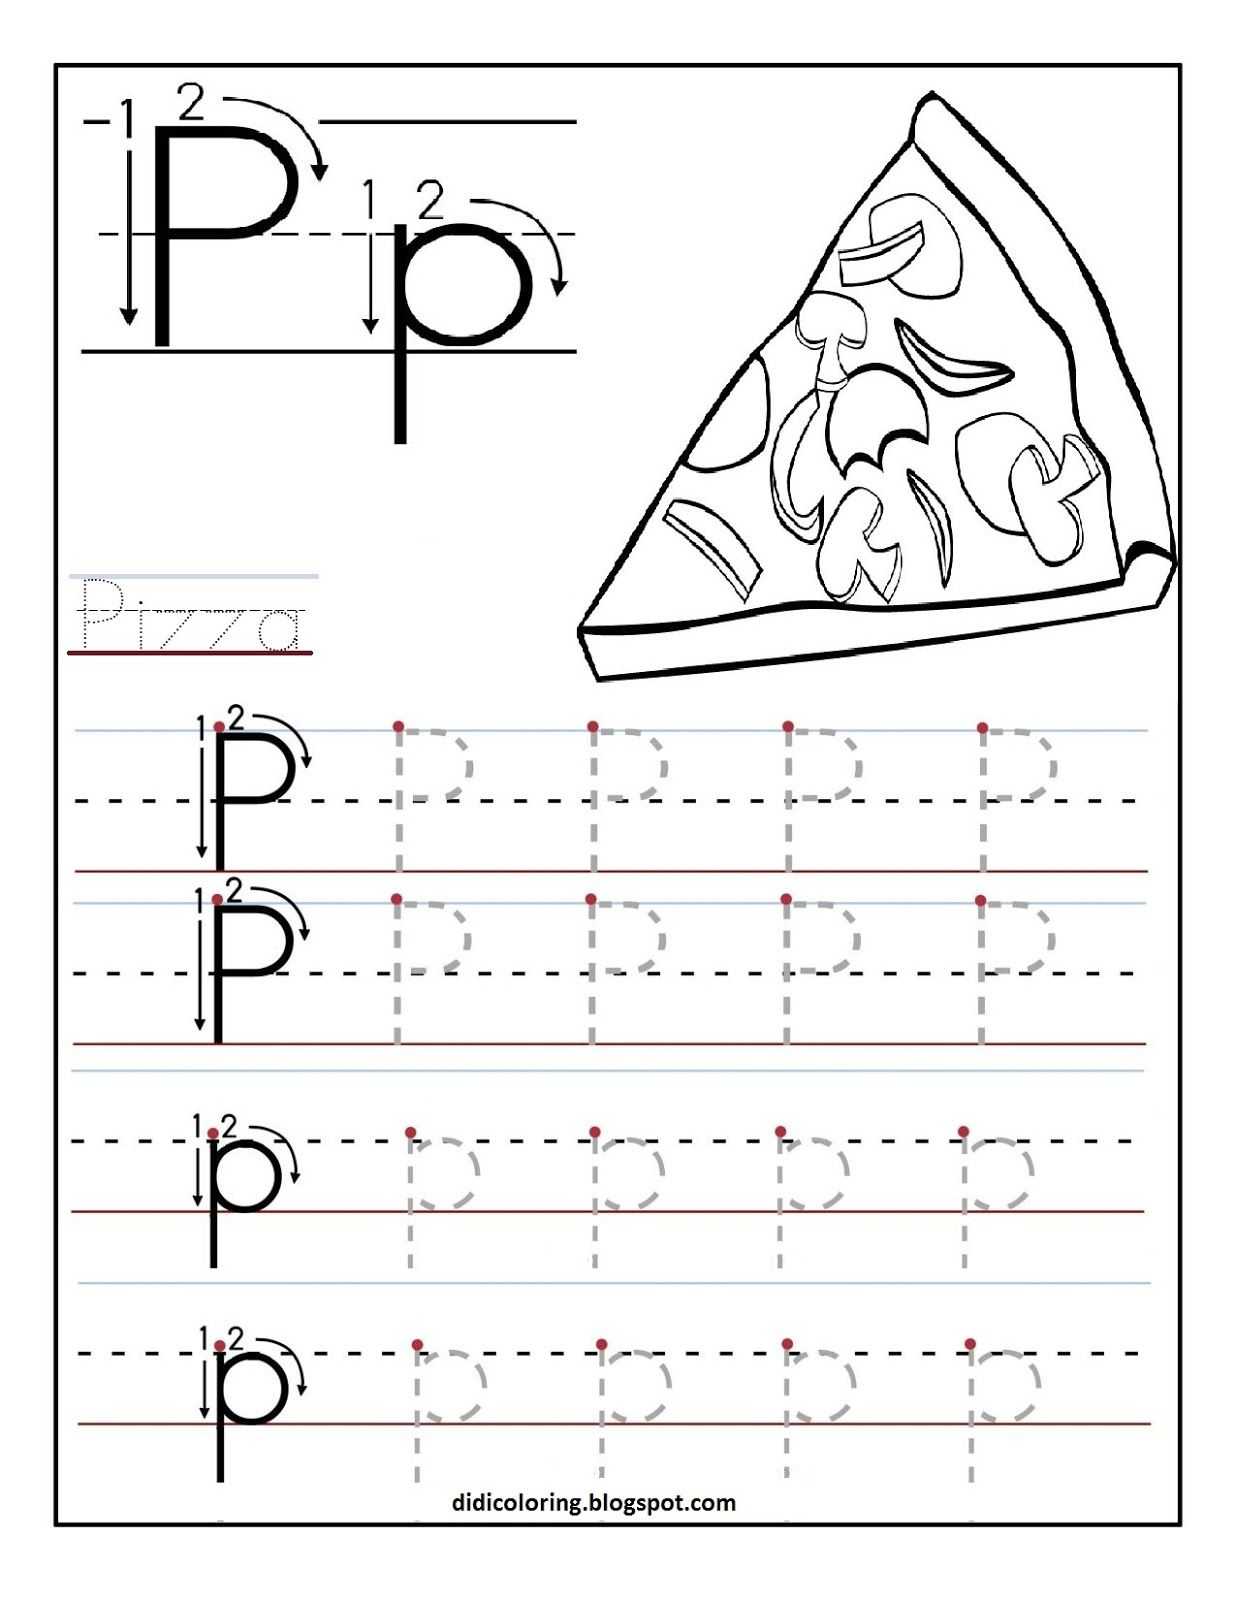 Preschool Writing Worksheets Free Printable Also Free Printable Worksheet Letter P for Your Child to Learn and Write